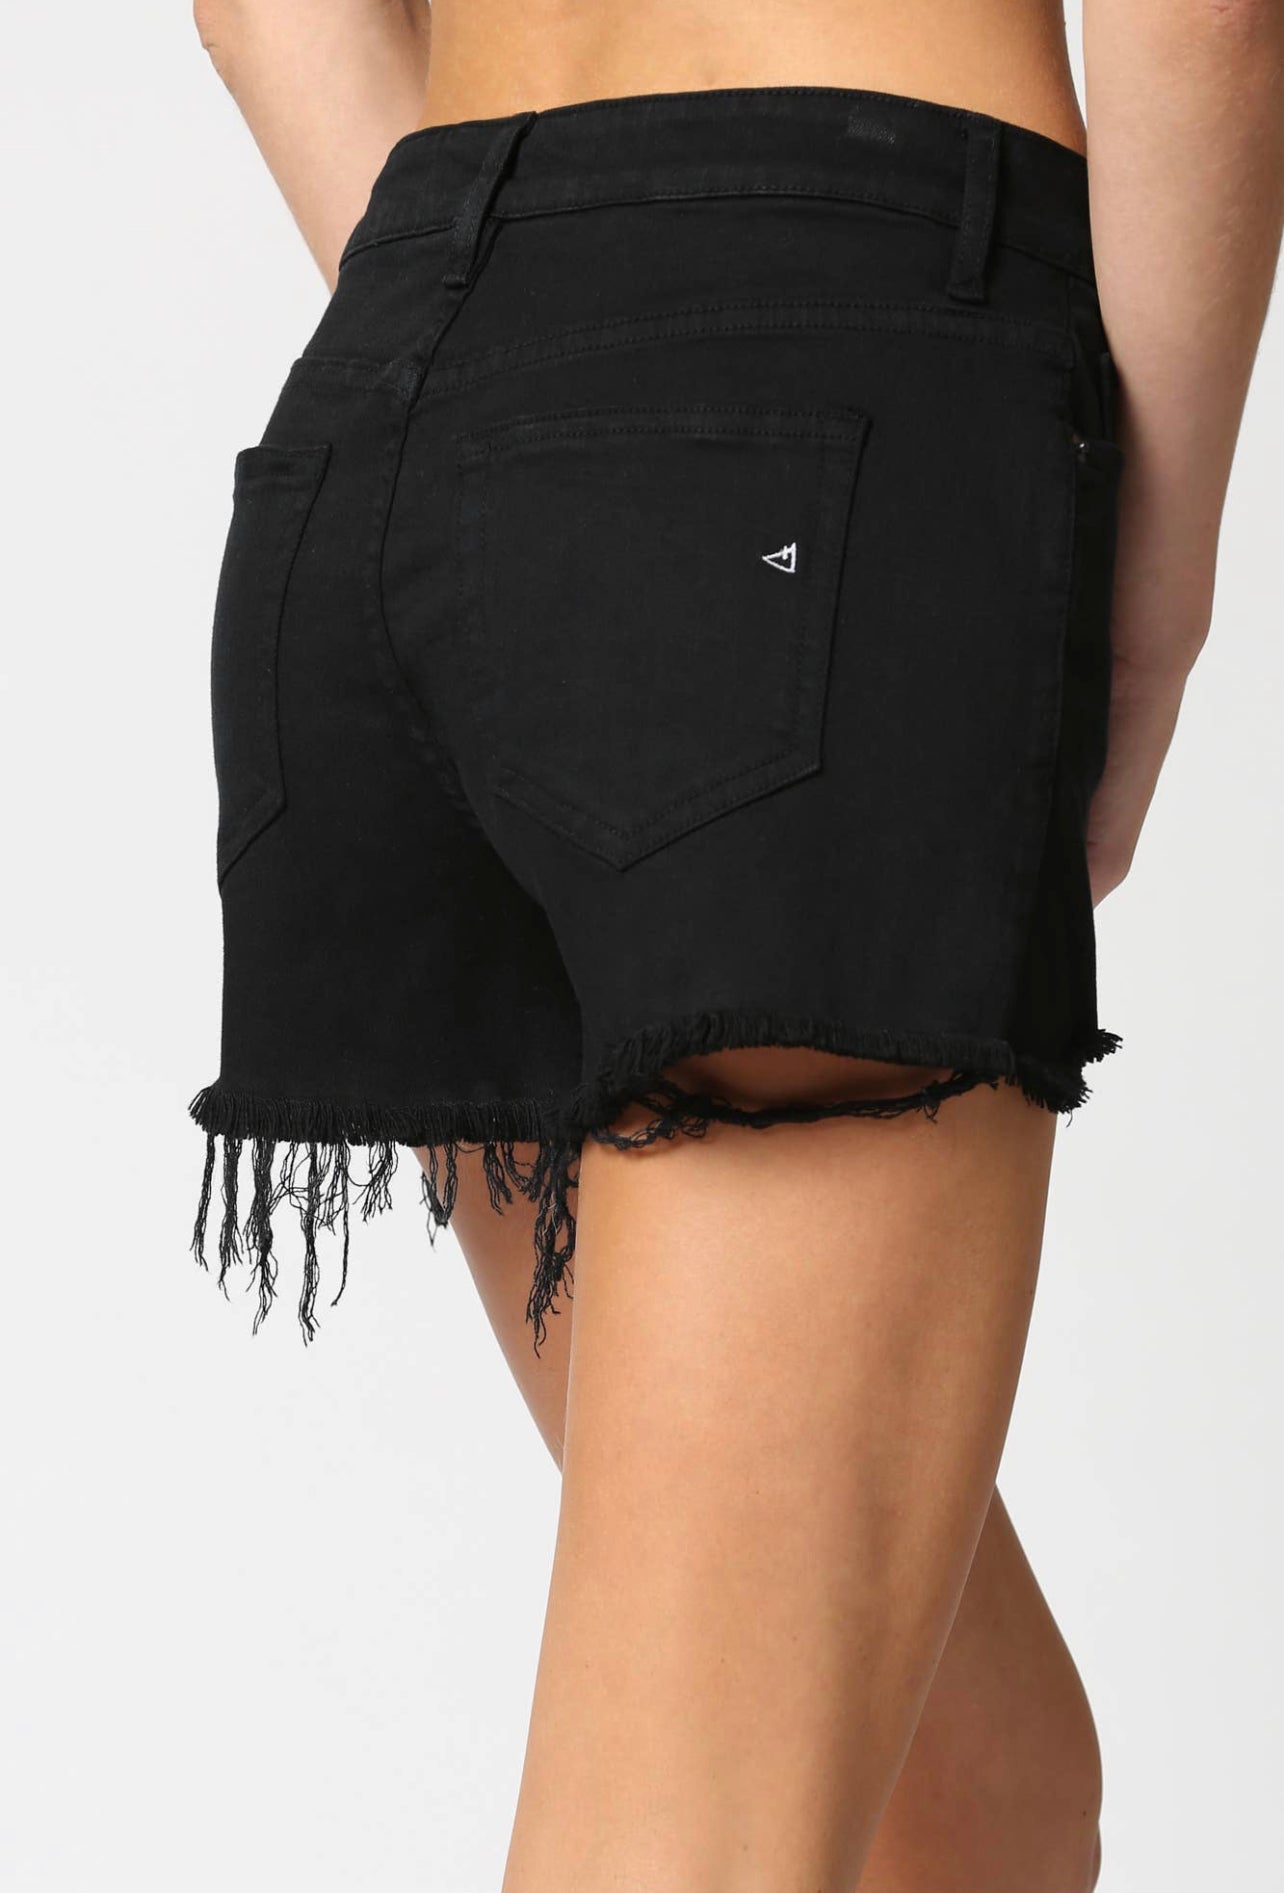 The Sofie Black Four Button High Rise Mom Shorts